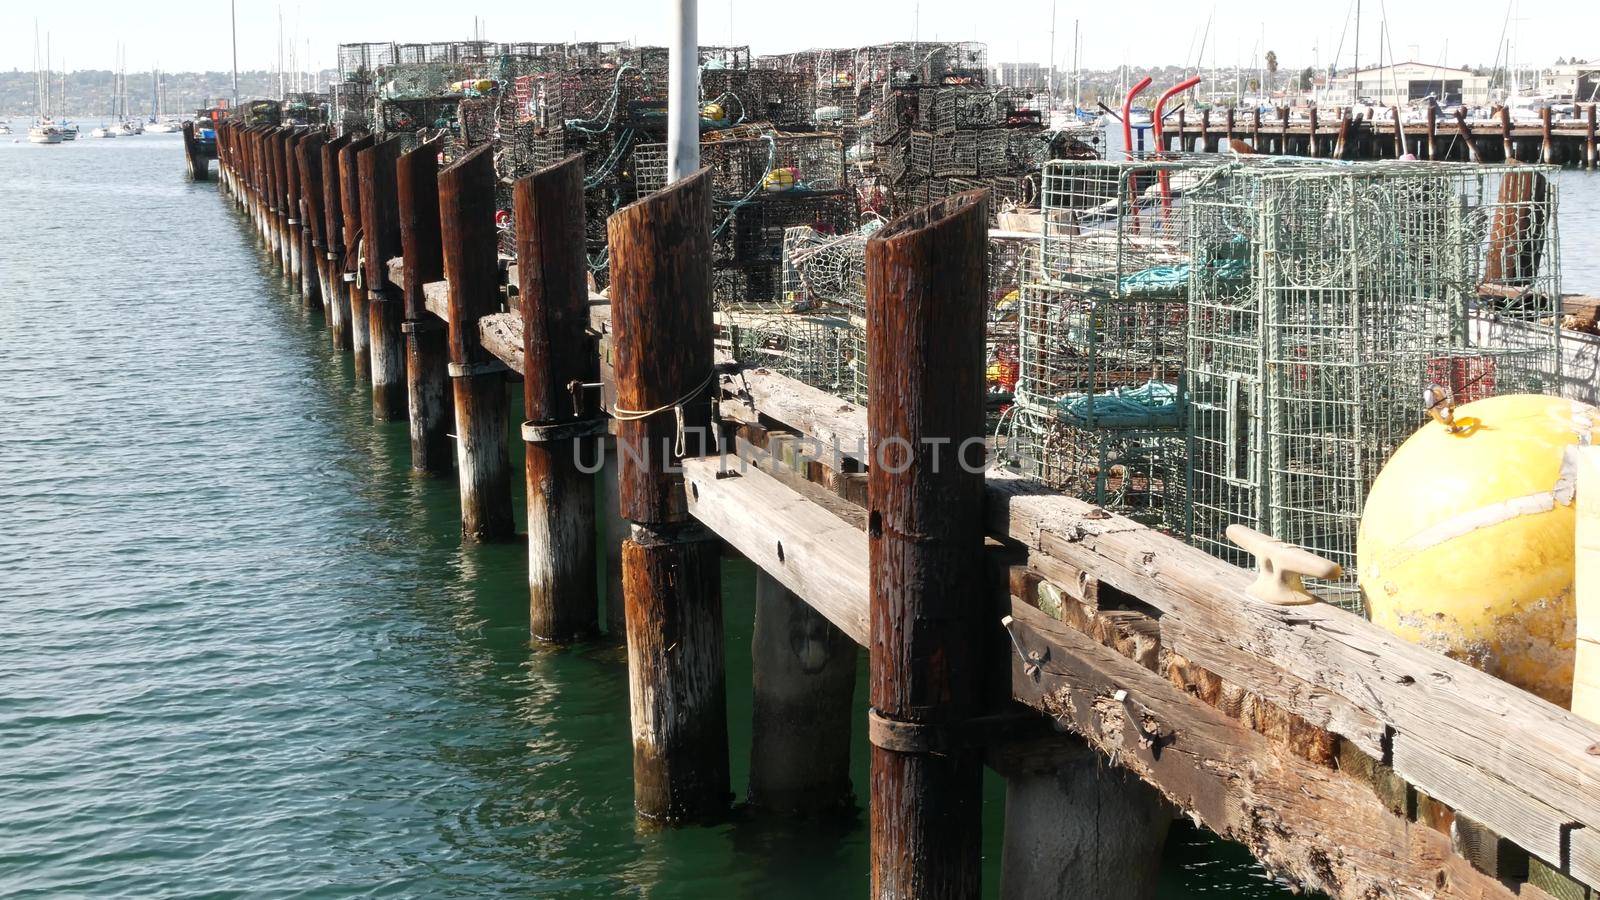 Traps, ropes and cages on pier, commercial dock, fishing industry in San Diego harbor, California USA. Empty pots and creels for seafood catching in port. Many fishermen's nets and baskets in seaport.